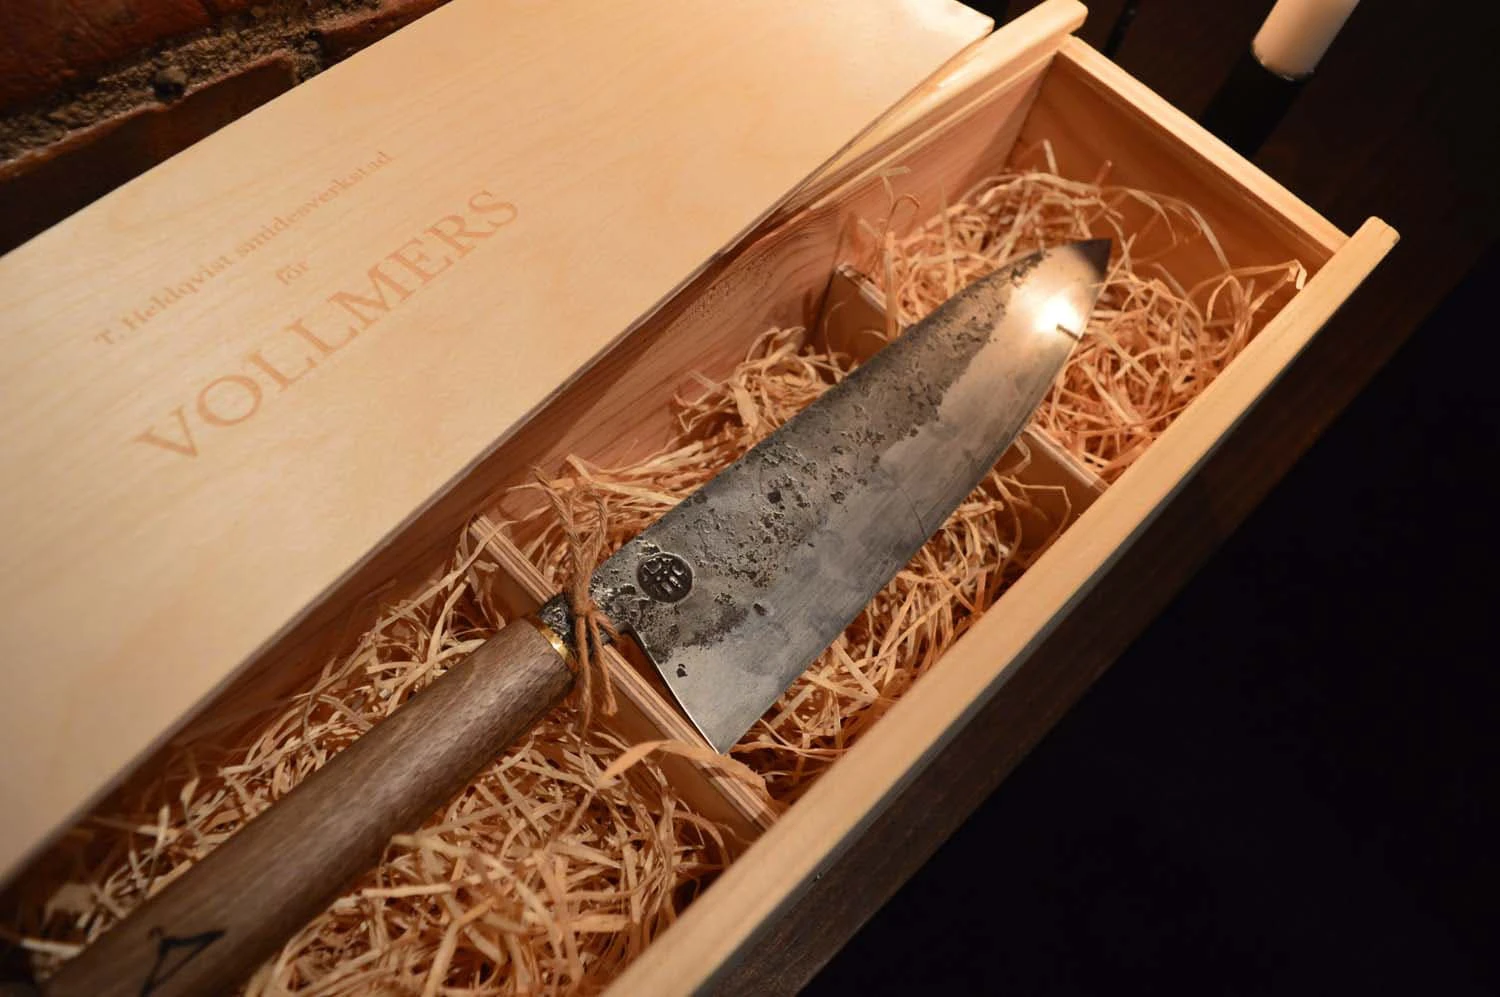 Vollmers knife